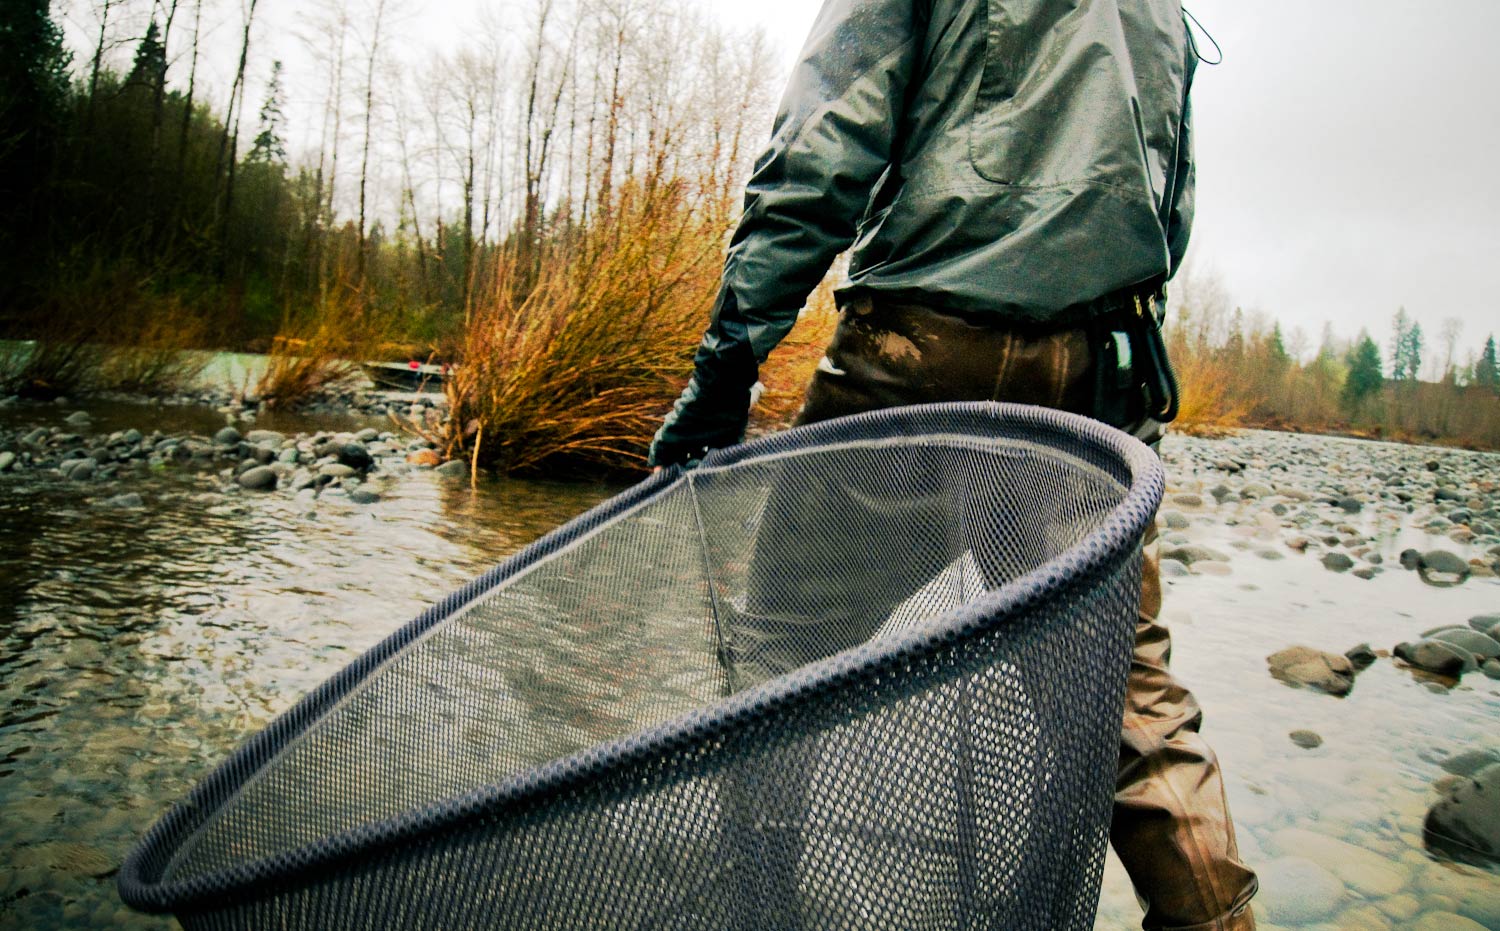 Nets, Go Big or Go Home - Fly Fishing, Gink and Gasoline, How to Fly Fish, Trout Fishing, Fly Tying